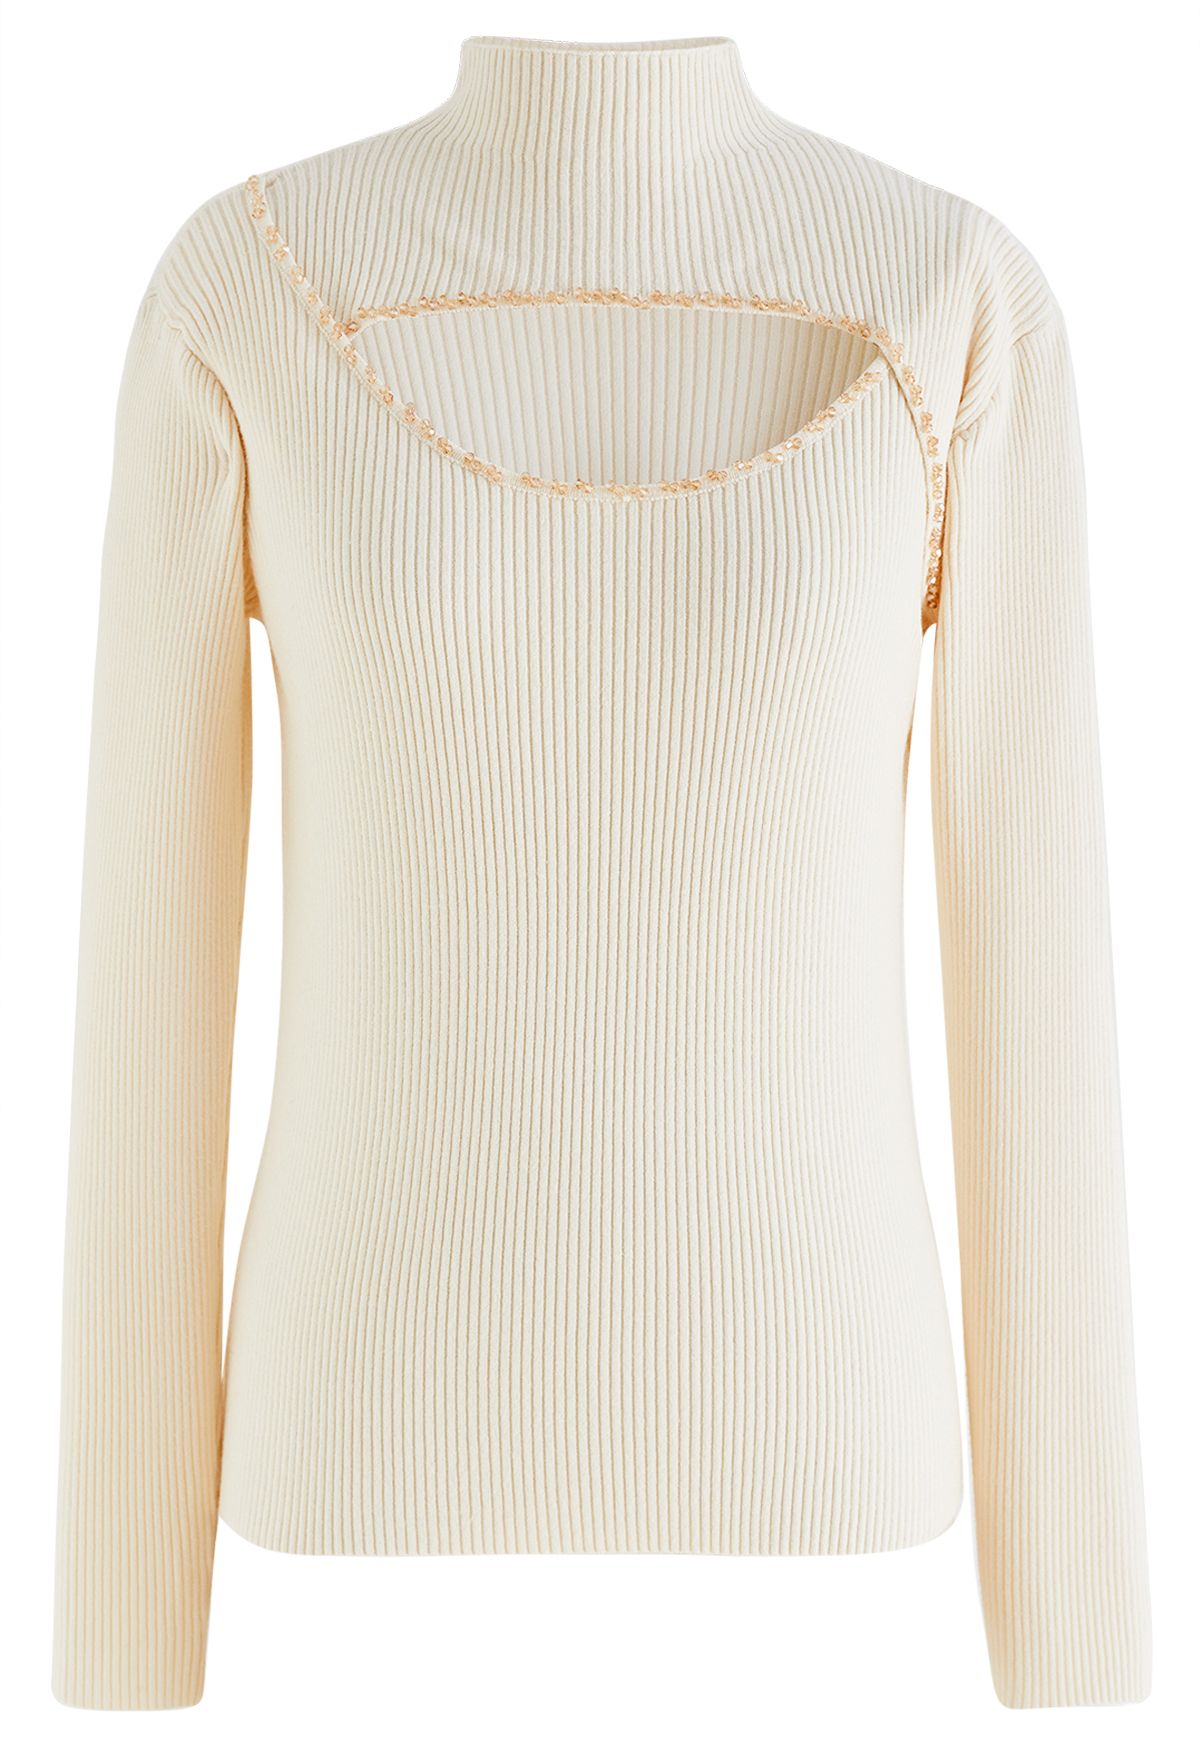 Crystal Trim Cutout High Neck Knit Top in Cream - Retro, Indie and ...